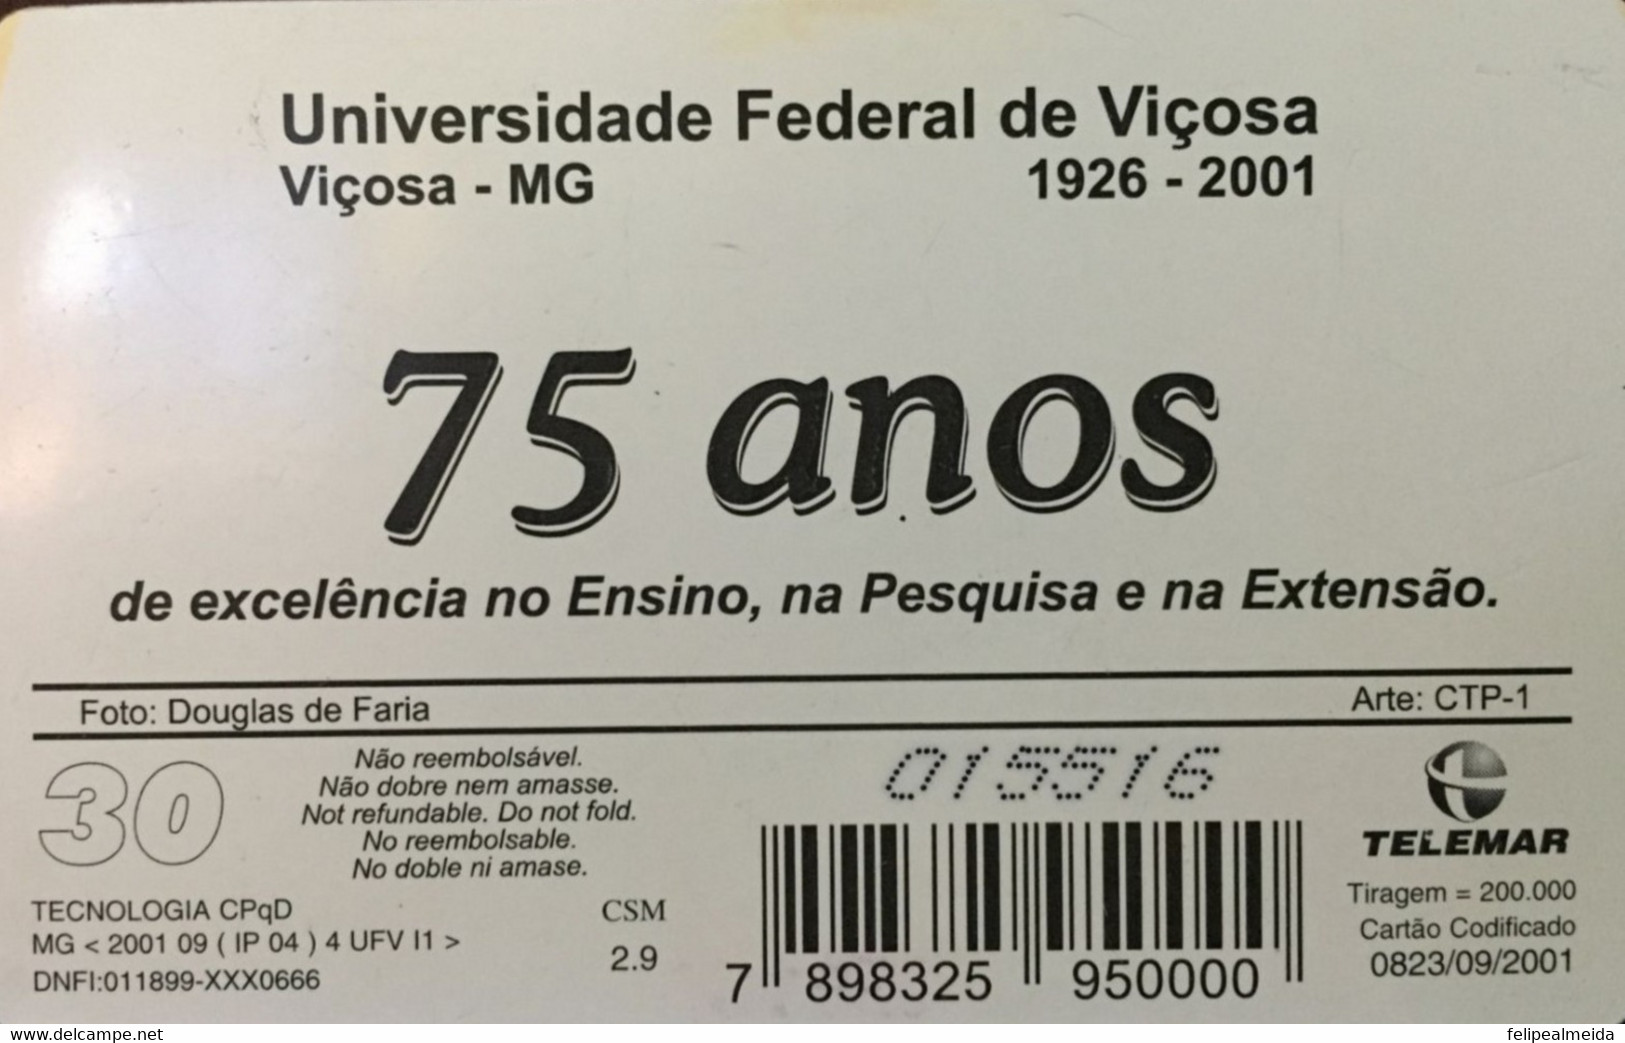 Phone Card Manufactured By Telemar In 2001 - 75 Years Of The Federal University Of Viçosa 1926 To 2001 - Photographer Do - Cultural